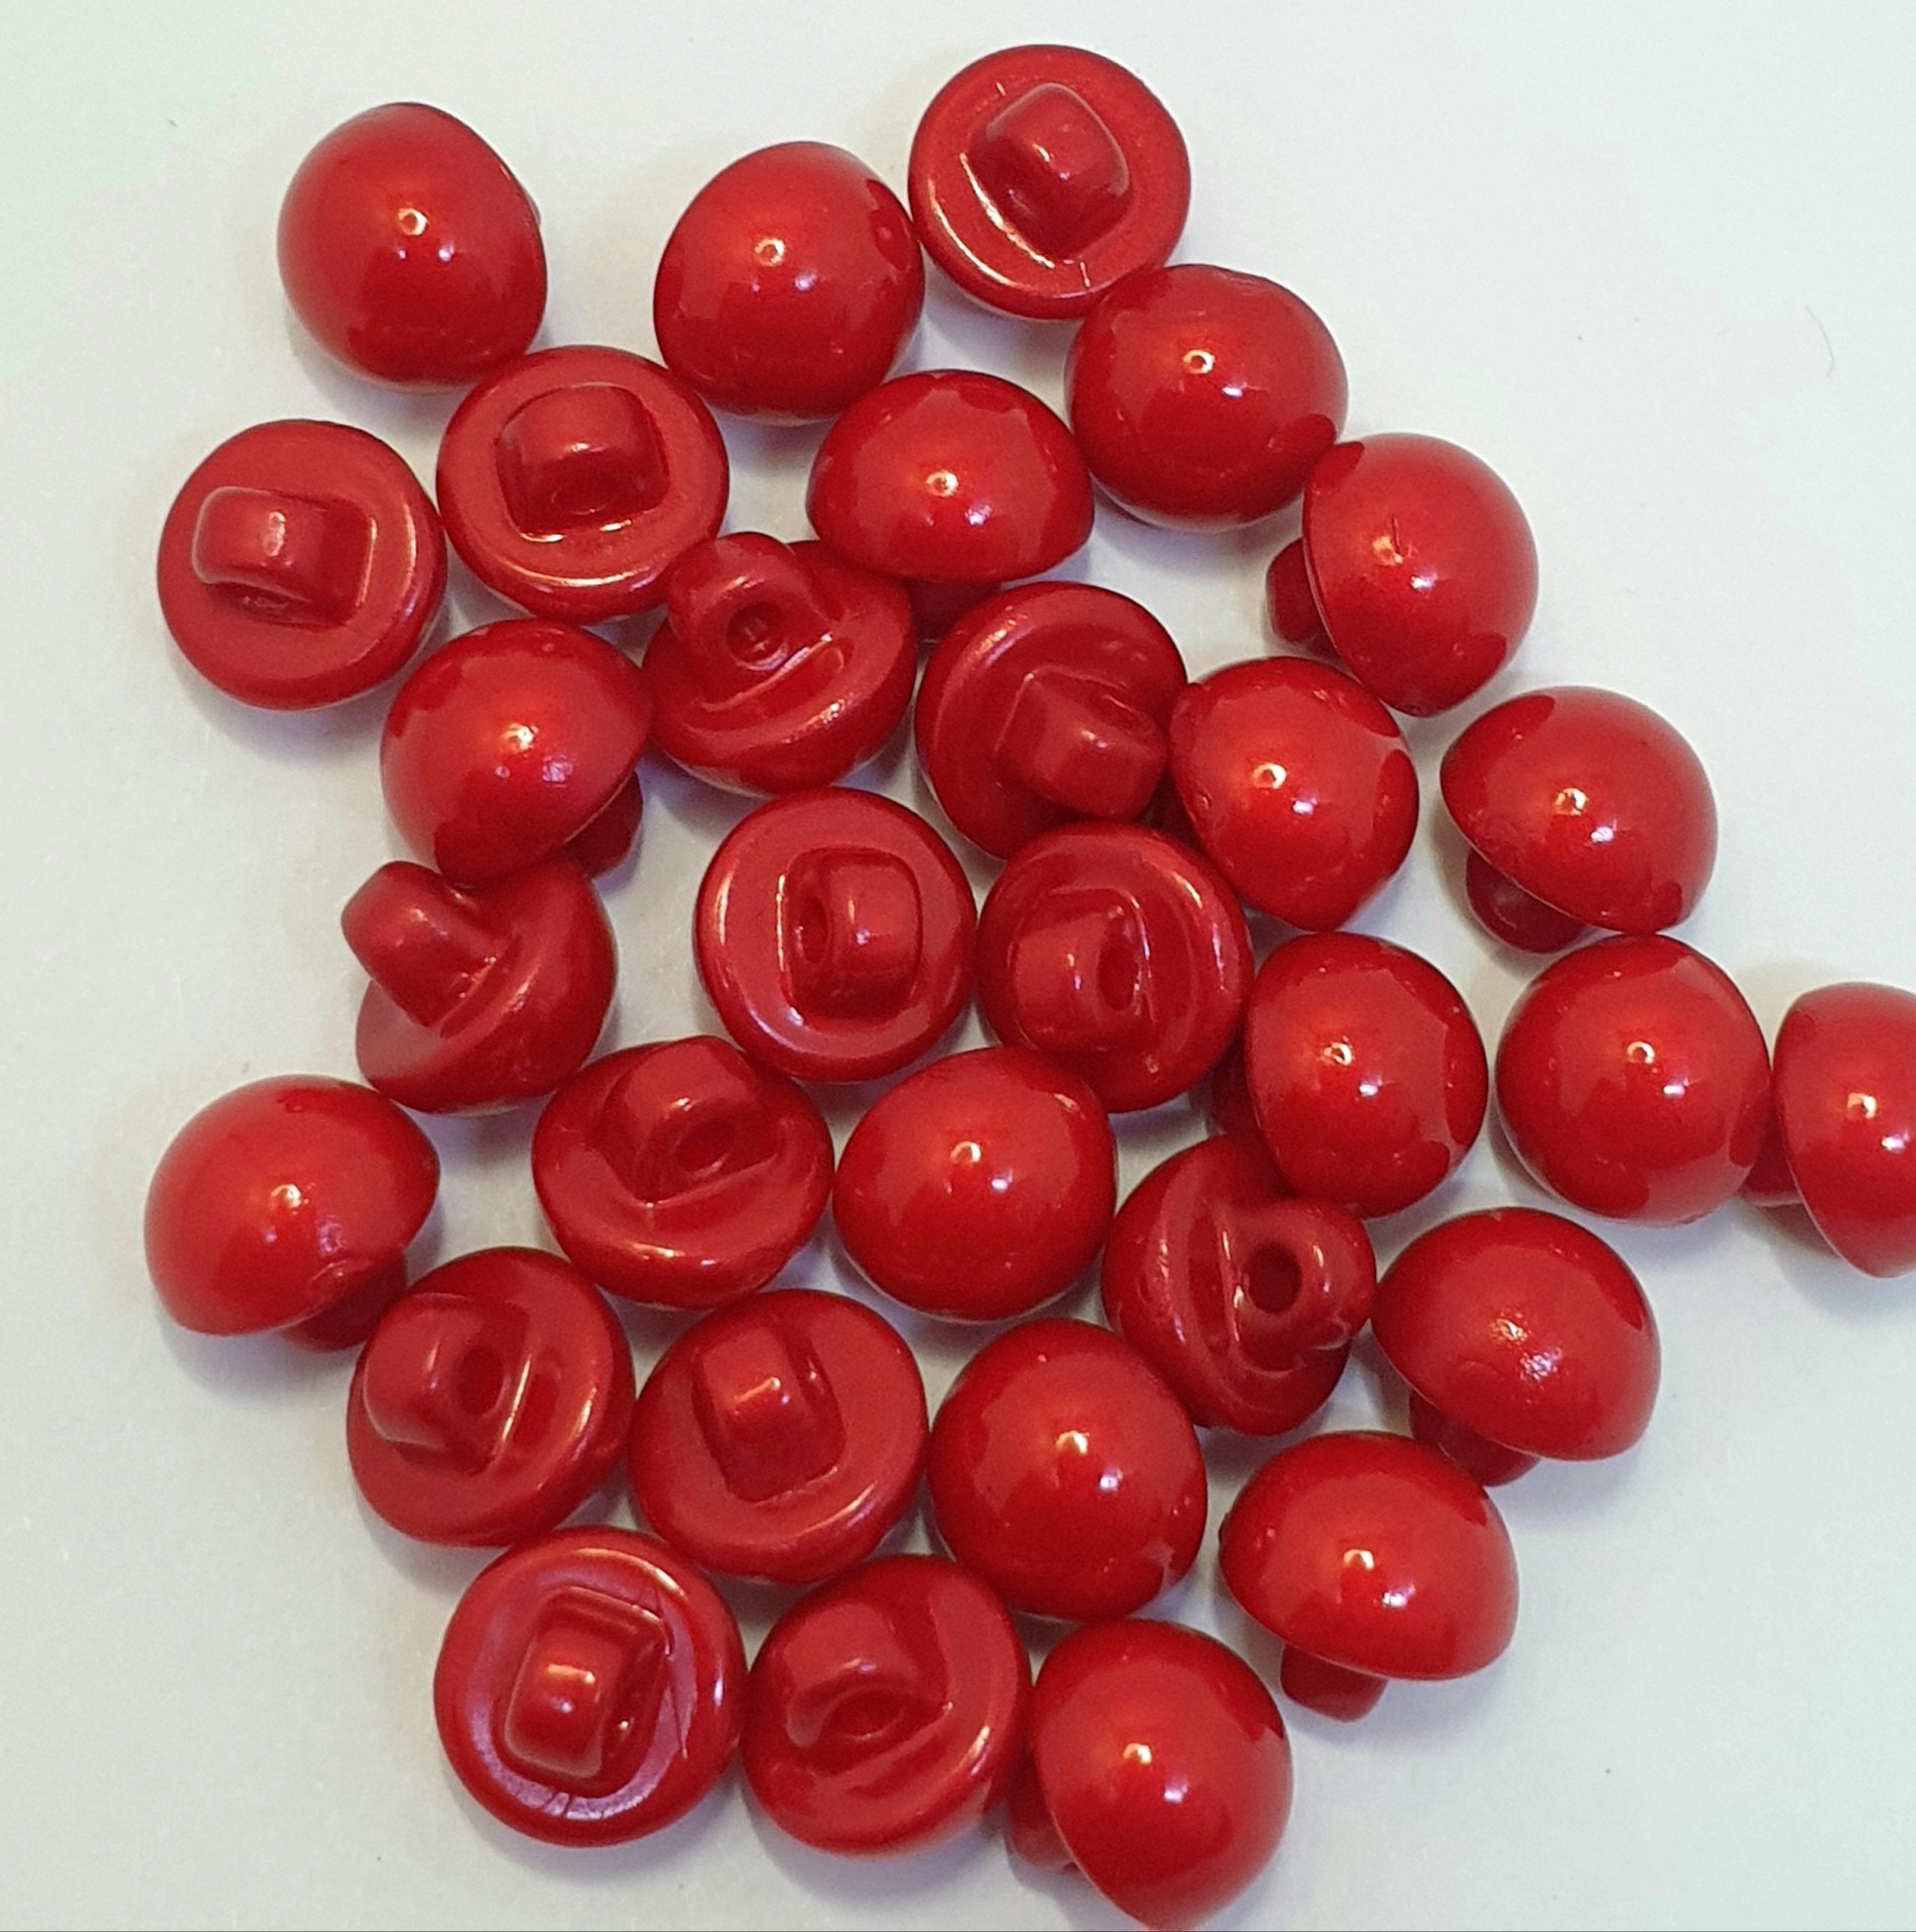 MajorCrafts 30pcs 10mm Red High-Grade Acrylic Small Round Sewing Mushroom Shank Buttons